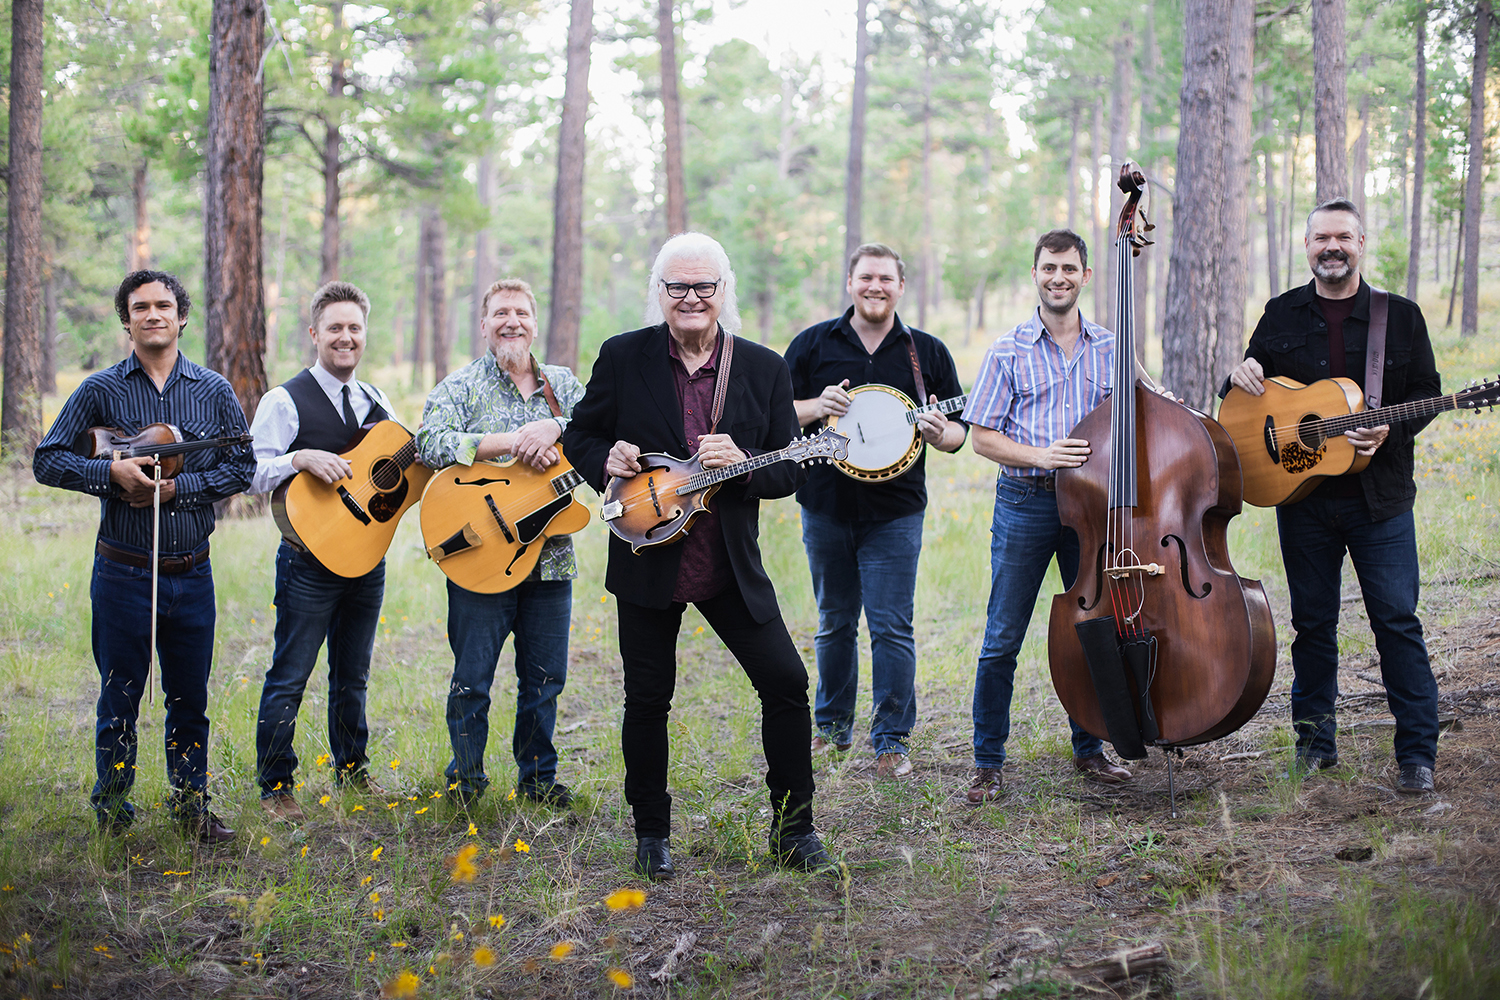 A promotional image for Ricky Skaggs and the Kentucky Thunder. The band is posing in a forest with their instruments.